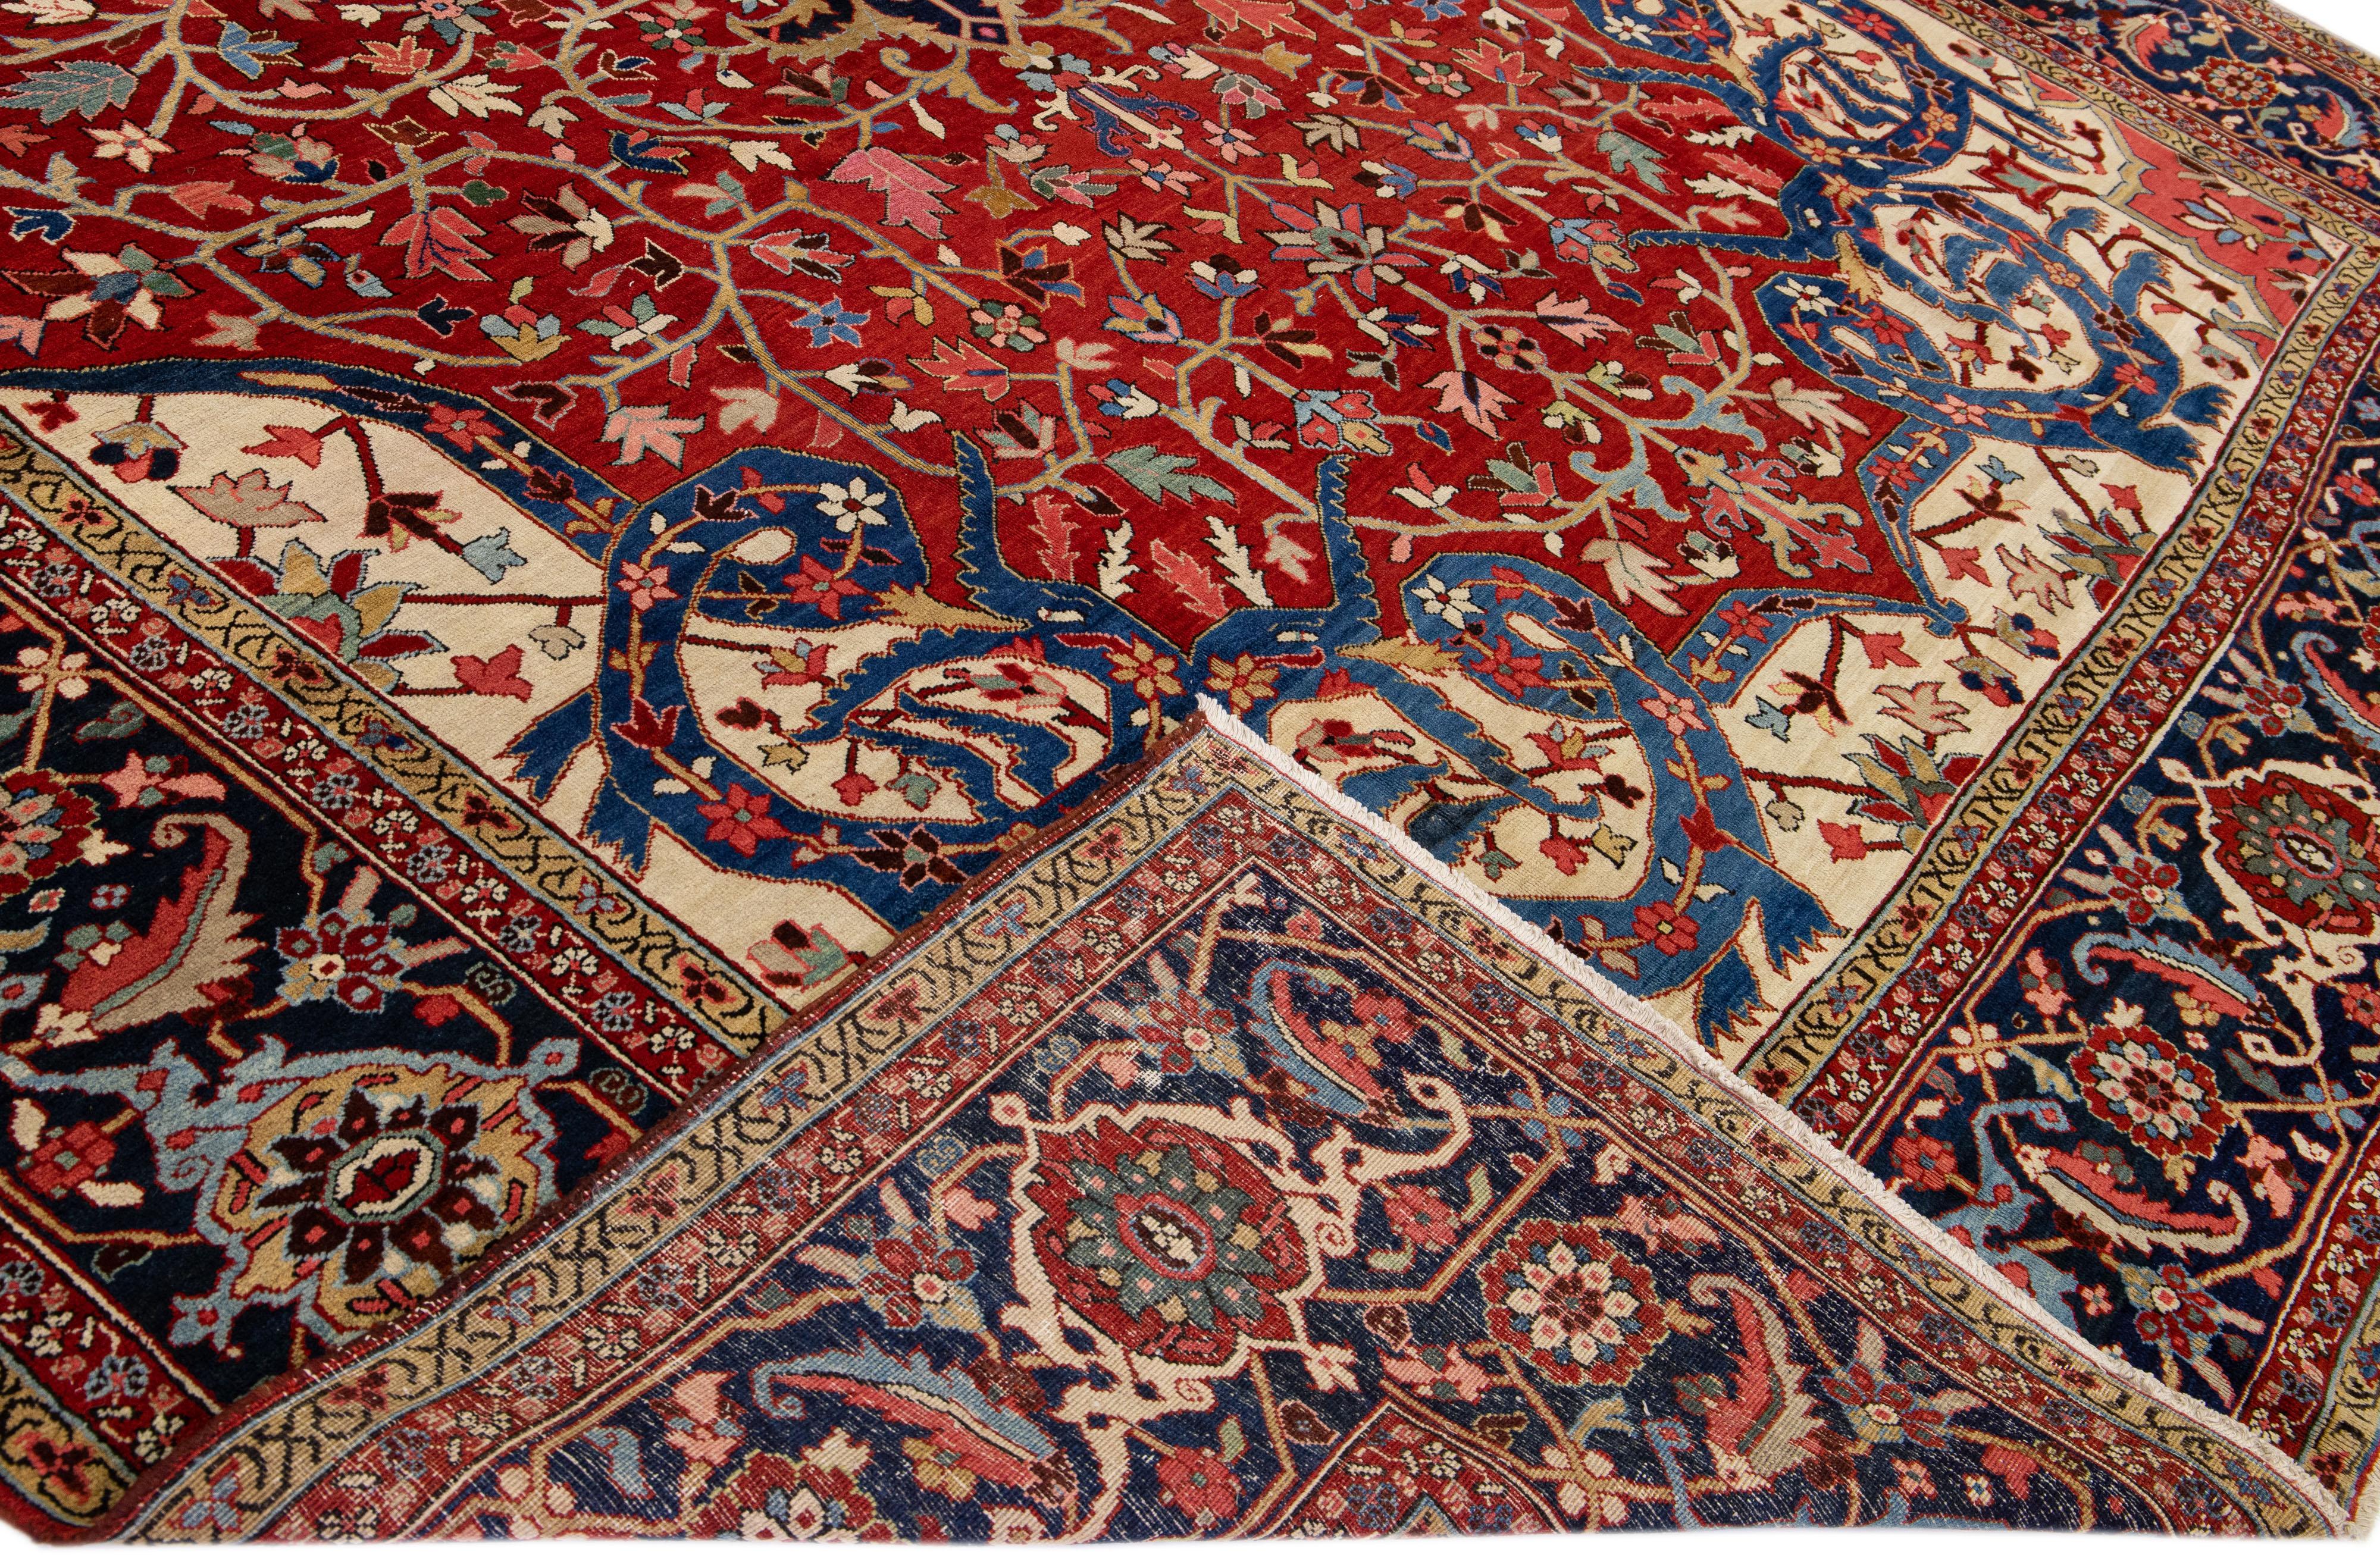 Beautiful Antique Heriz hand-knotted wool rug with a red field. This Persian rug has multi-color accents that feature a gorgeous all-over geometric floral medallion design.

This rug measures: 11'8